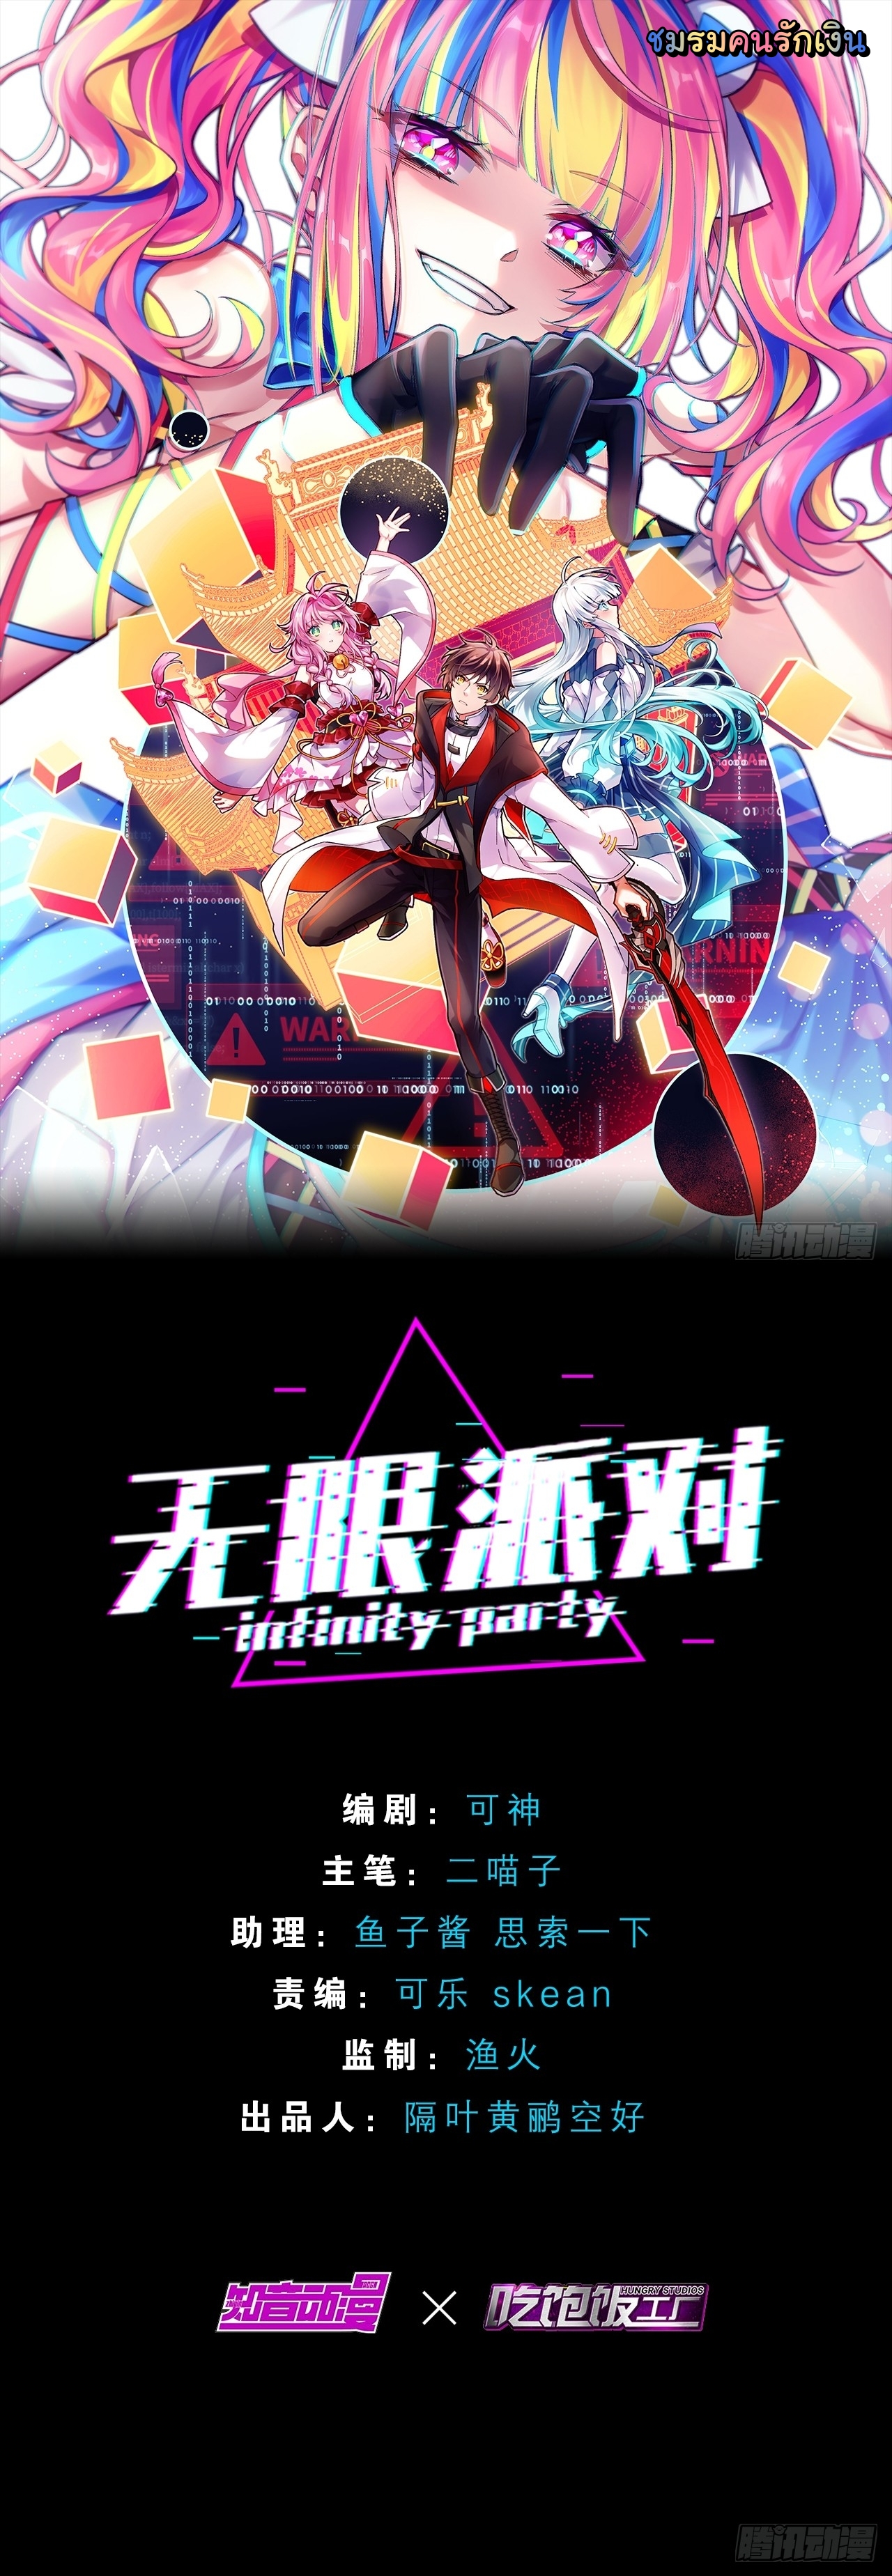 Infinity party 3 (1)